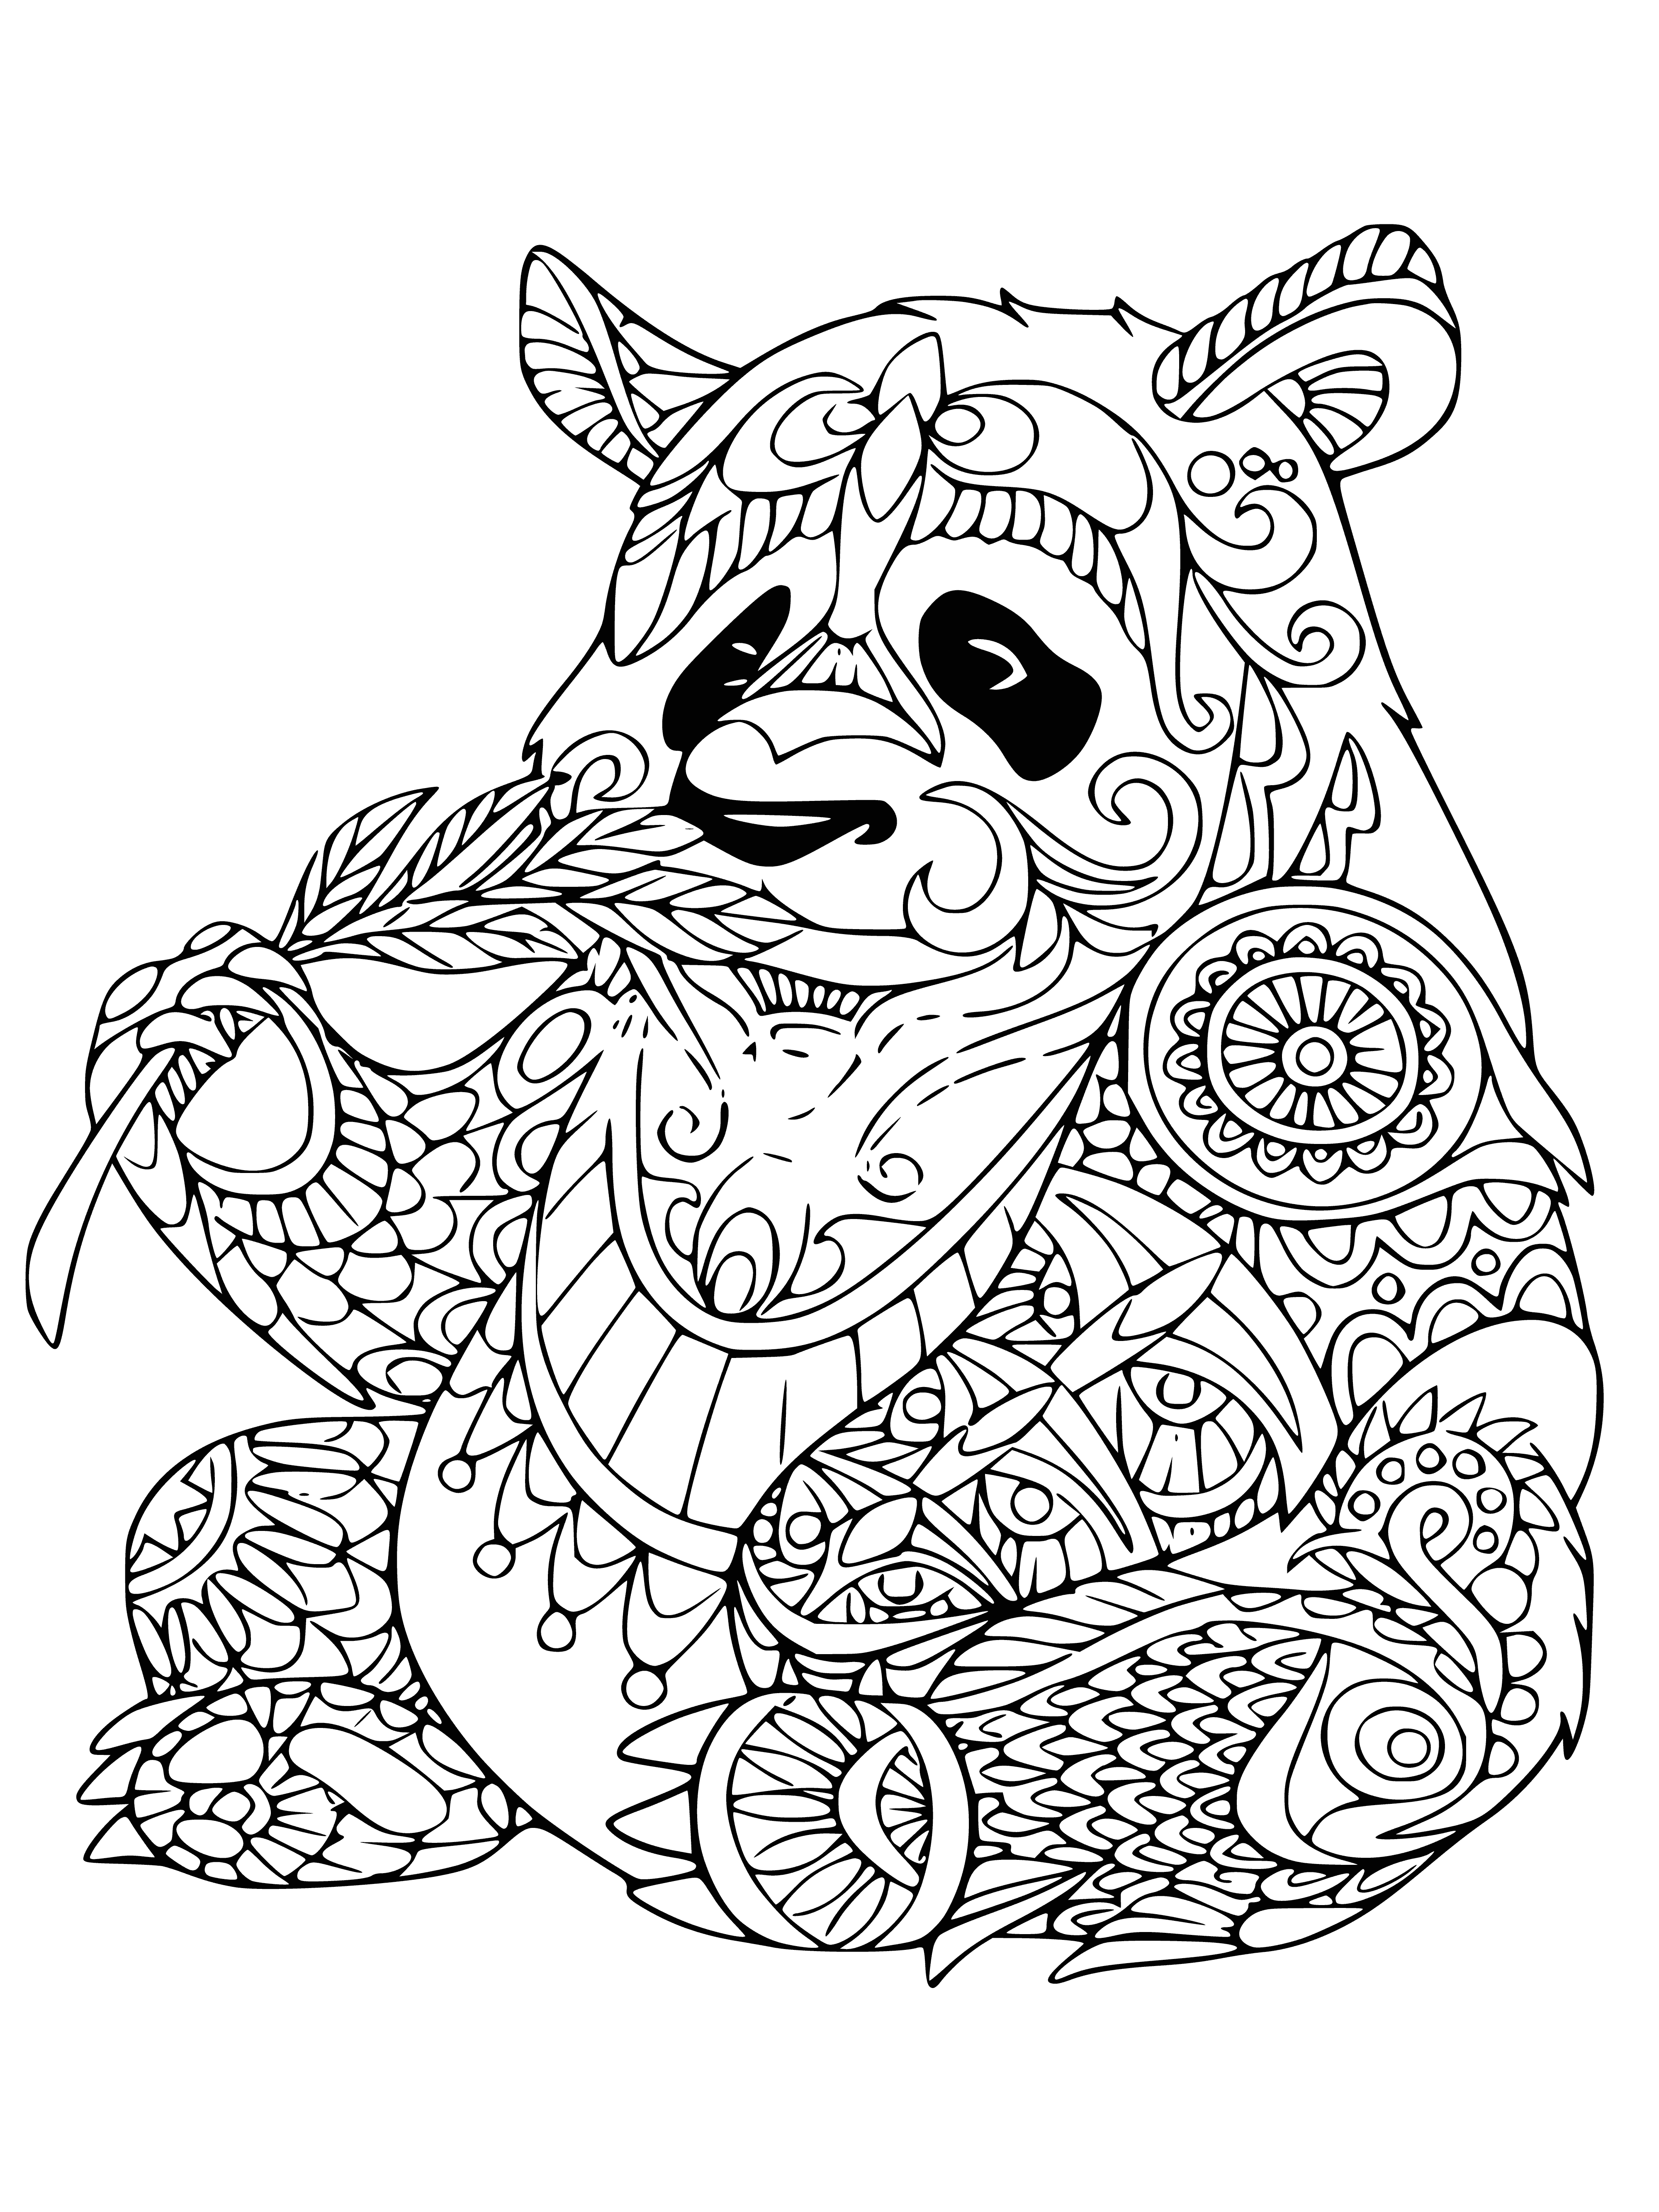 coloring page: Panda in the center of page has a black & white body, small black nose, ears & legs; there's a yellow flower & green leaf in corners.